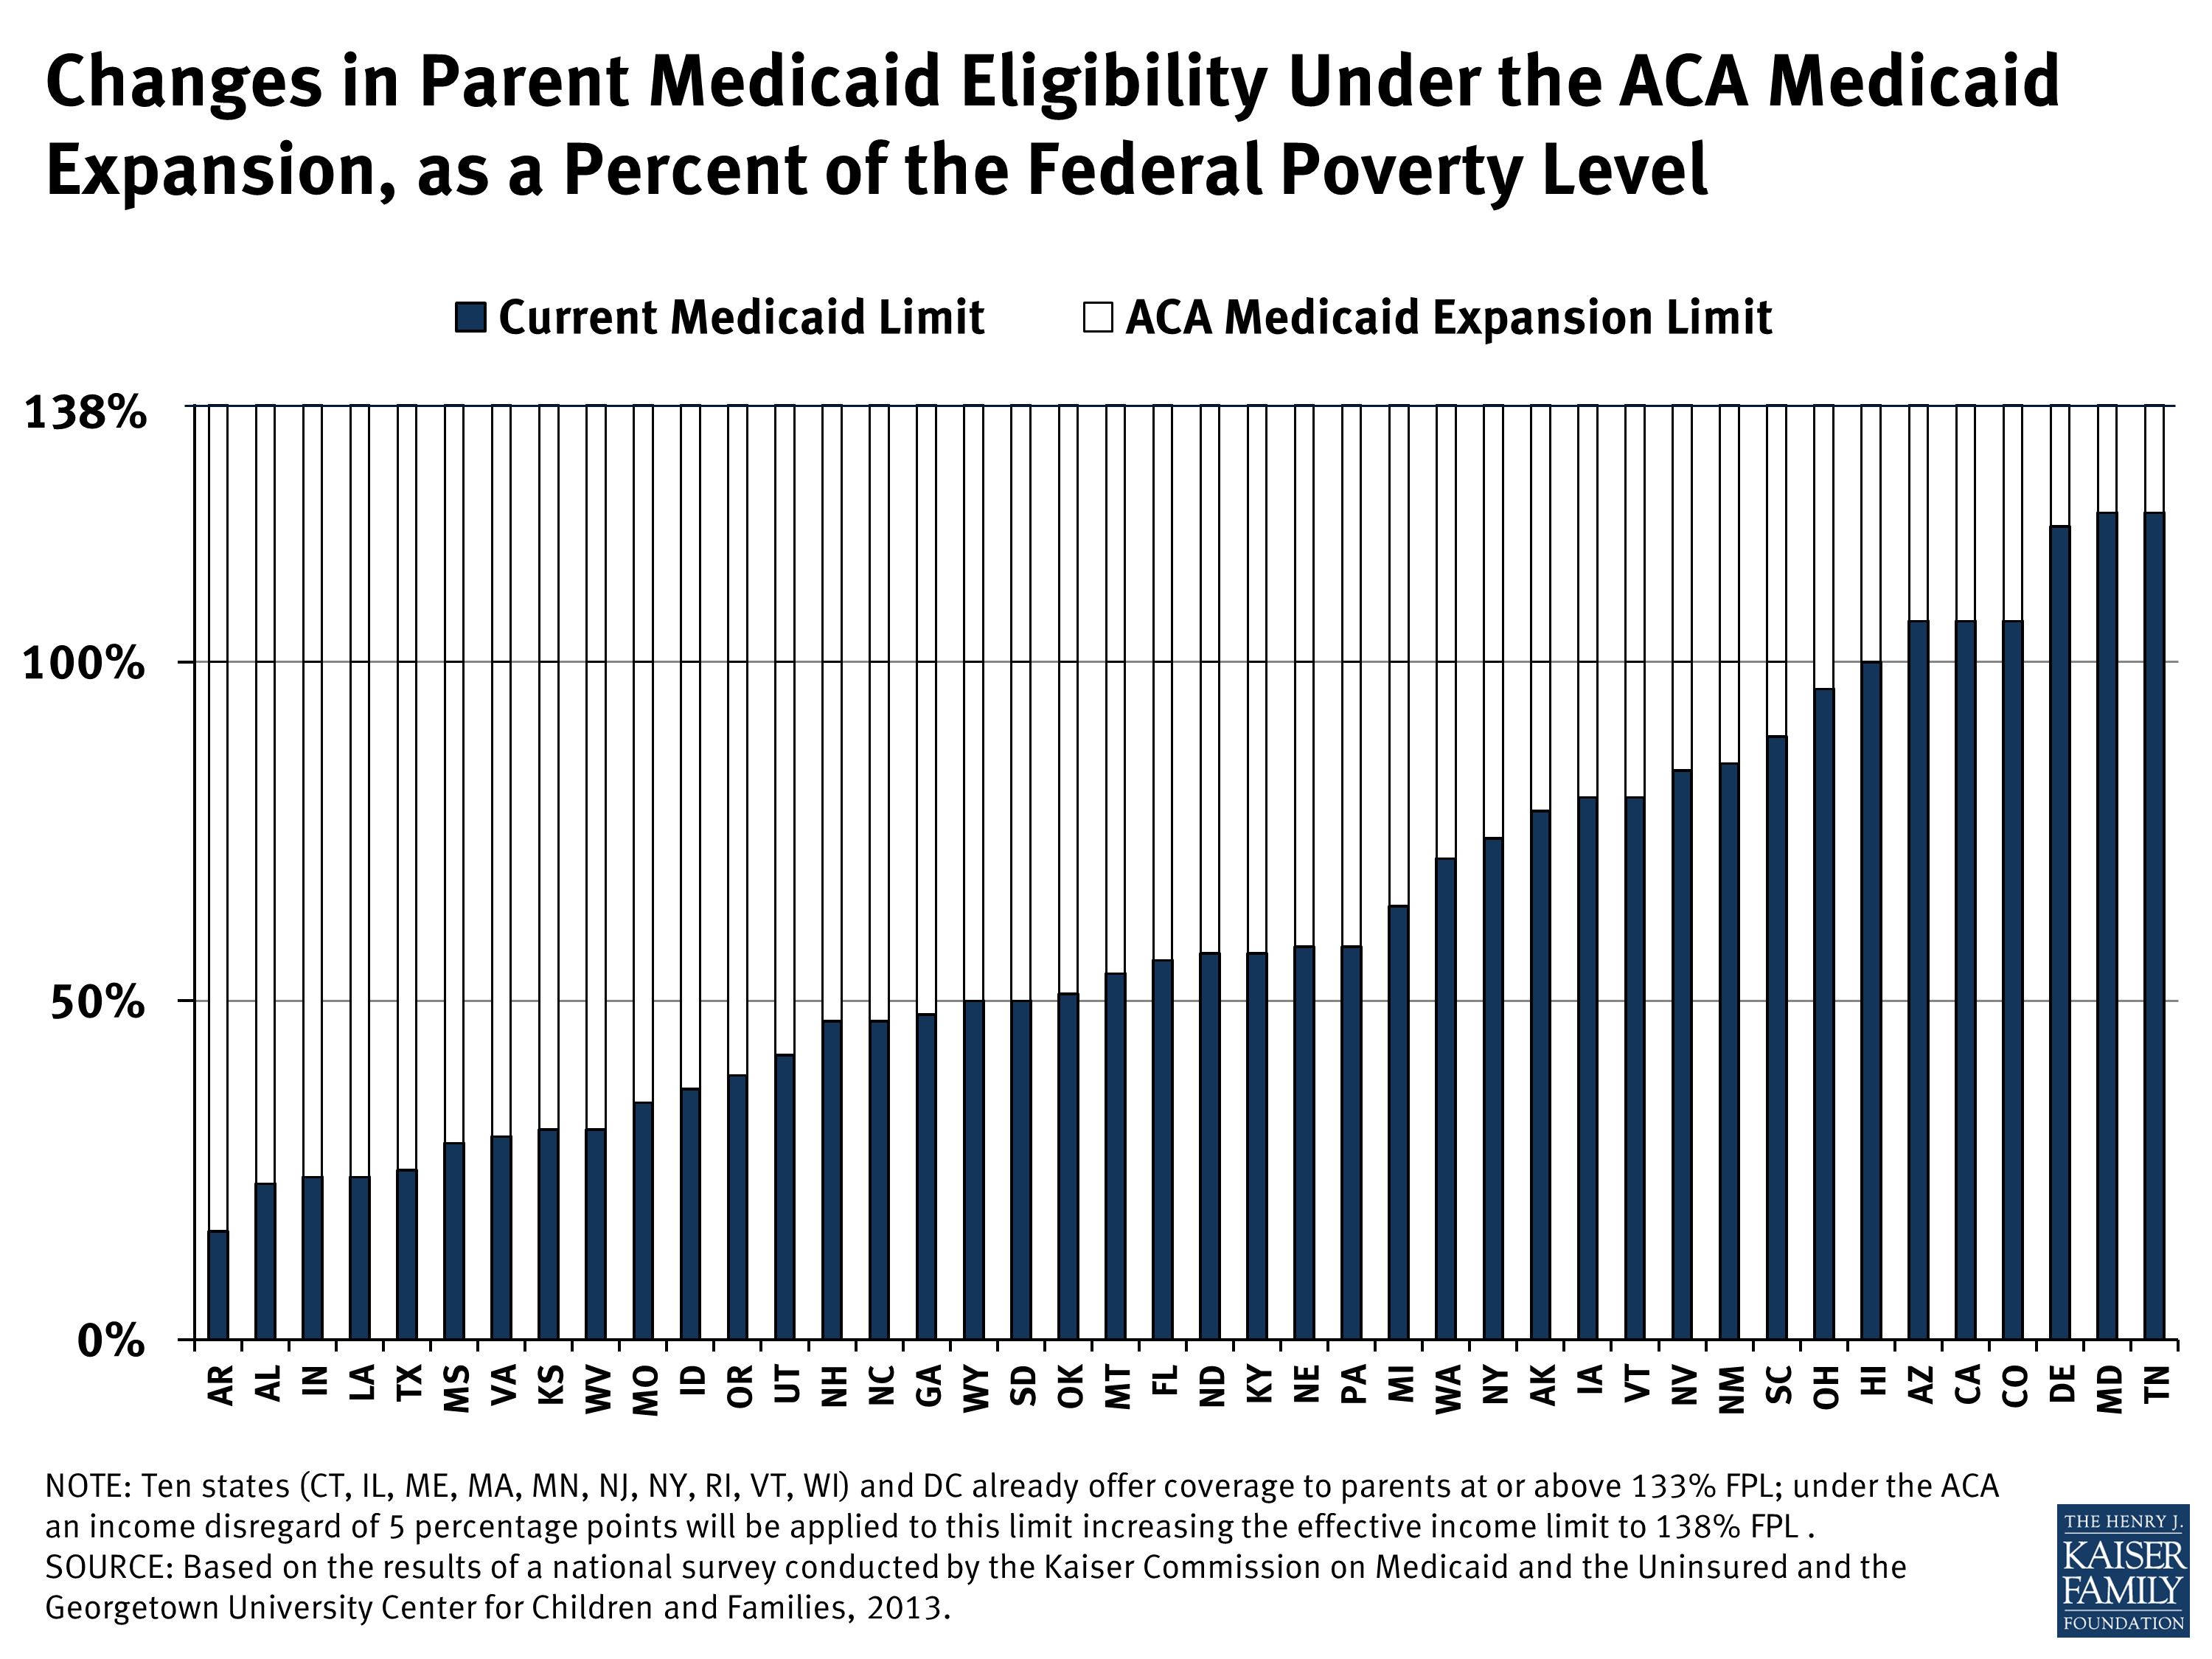 Changes in Parent Medicaid Eligibility Under the ACA Medicaid Expansion, as a Percent of the